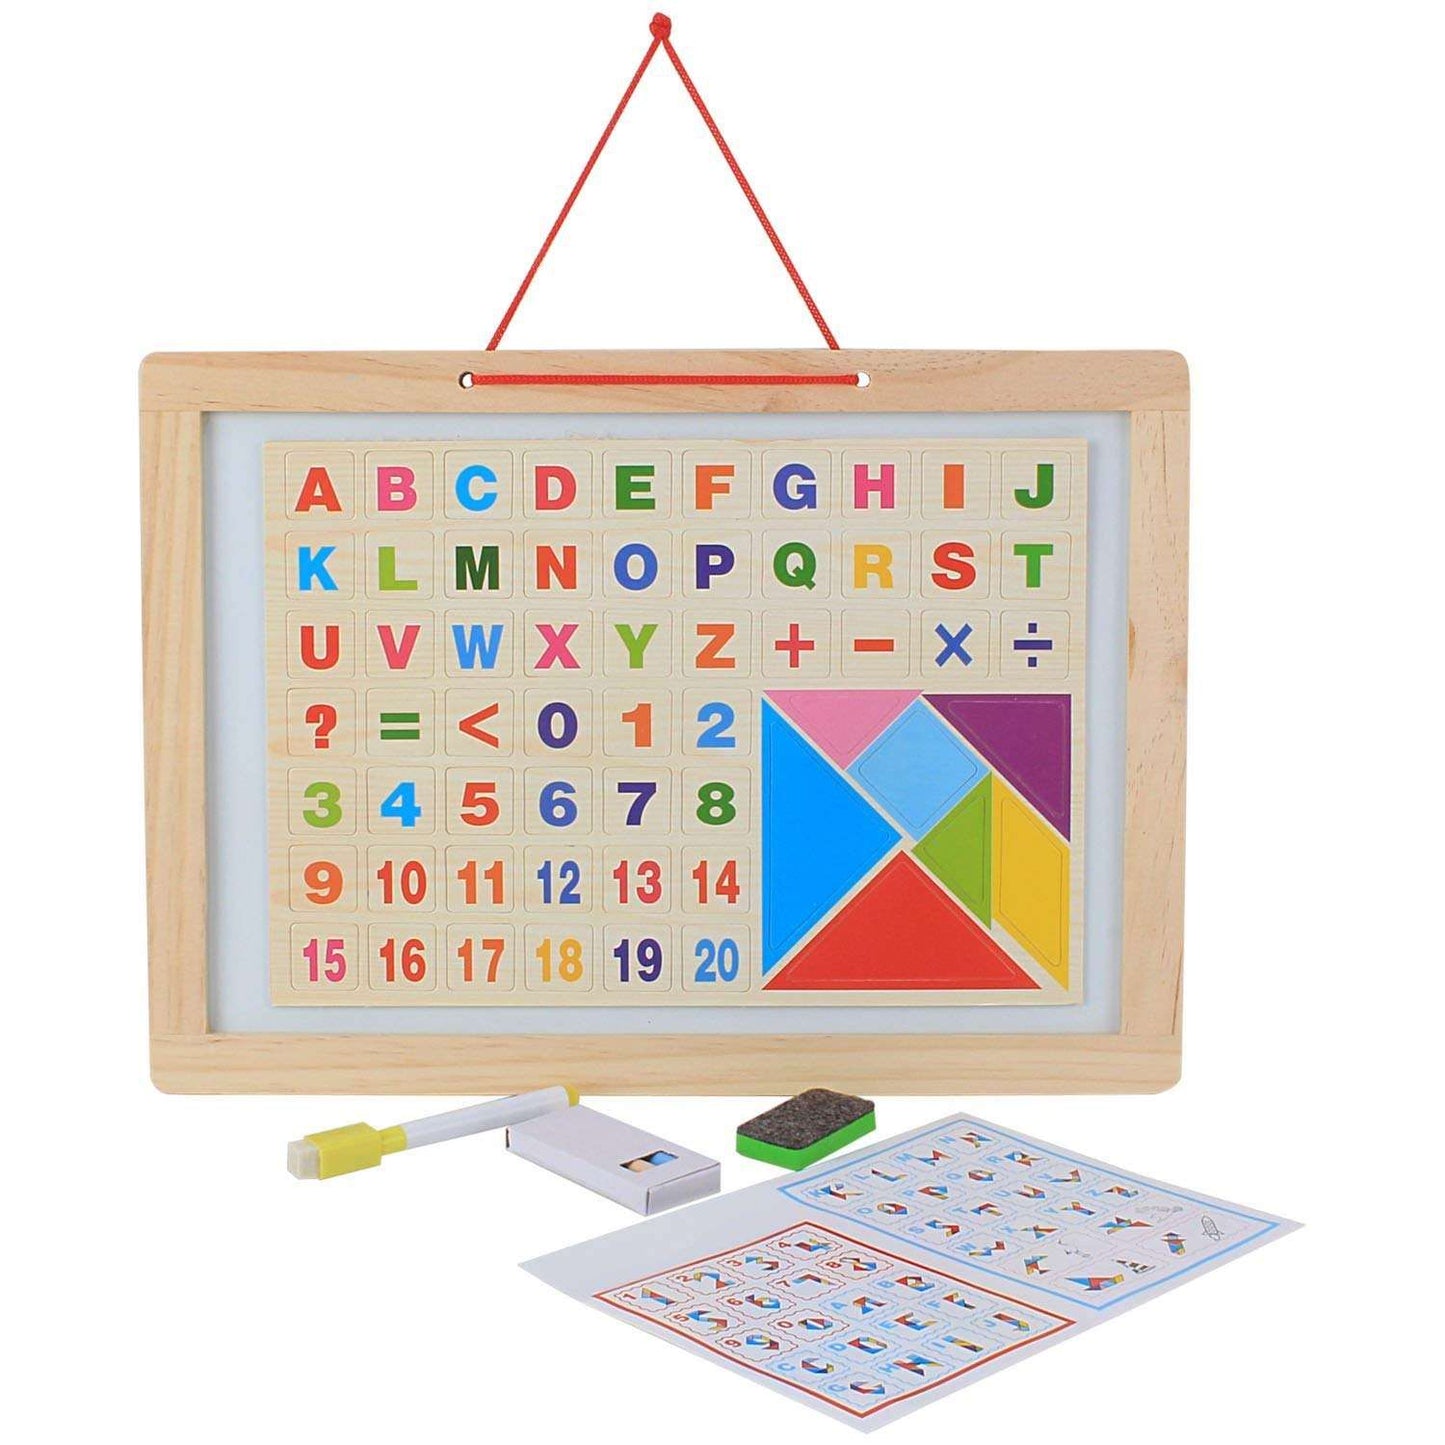 Magnetic  ABC 123 Writing Board - Small